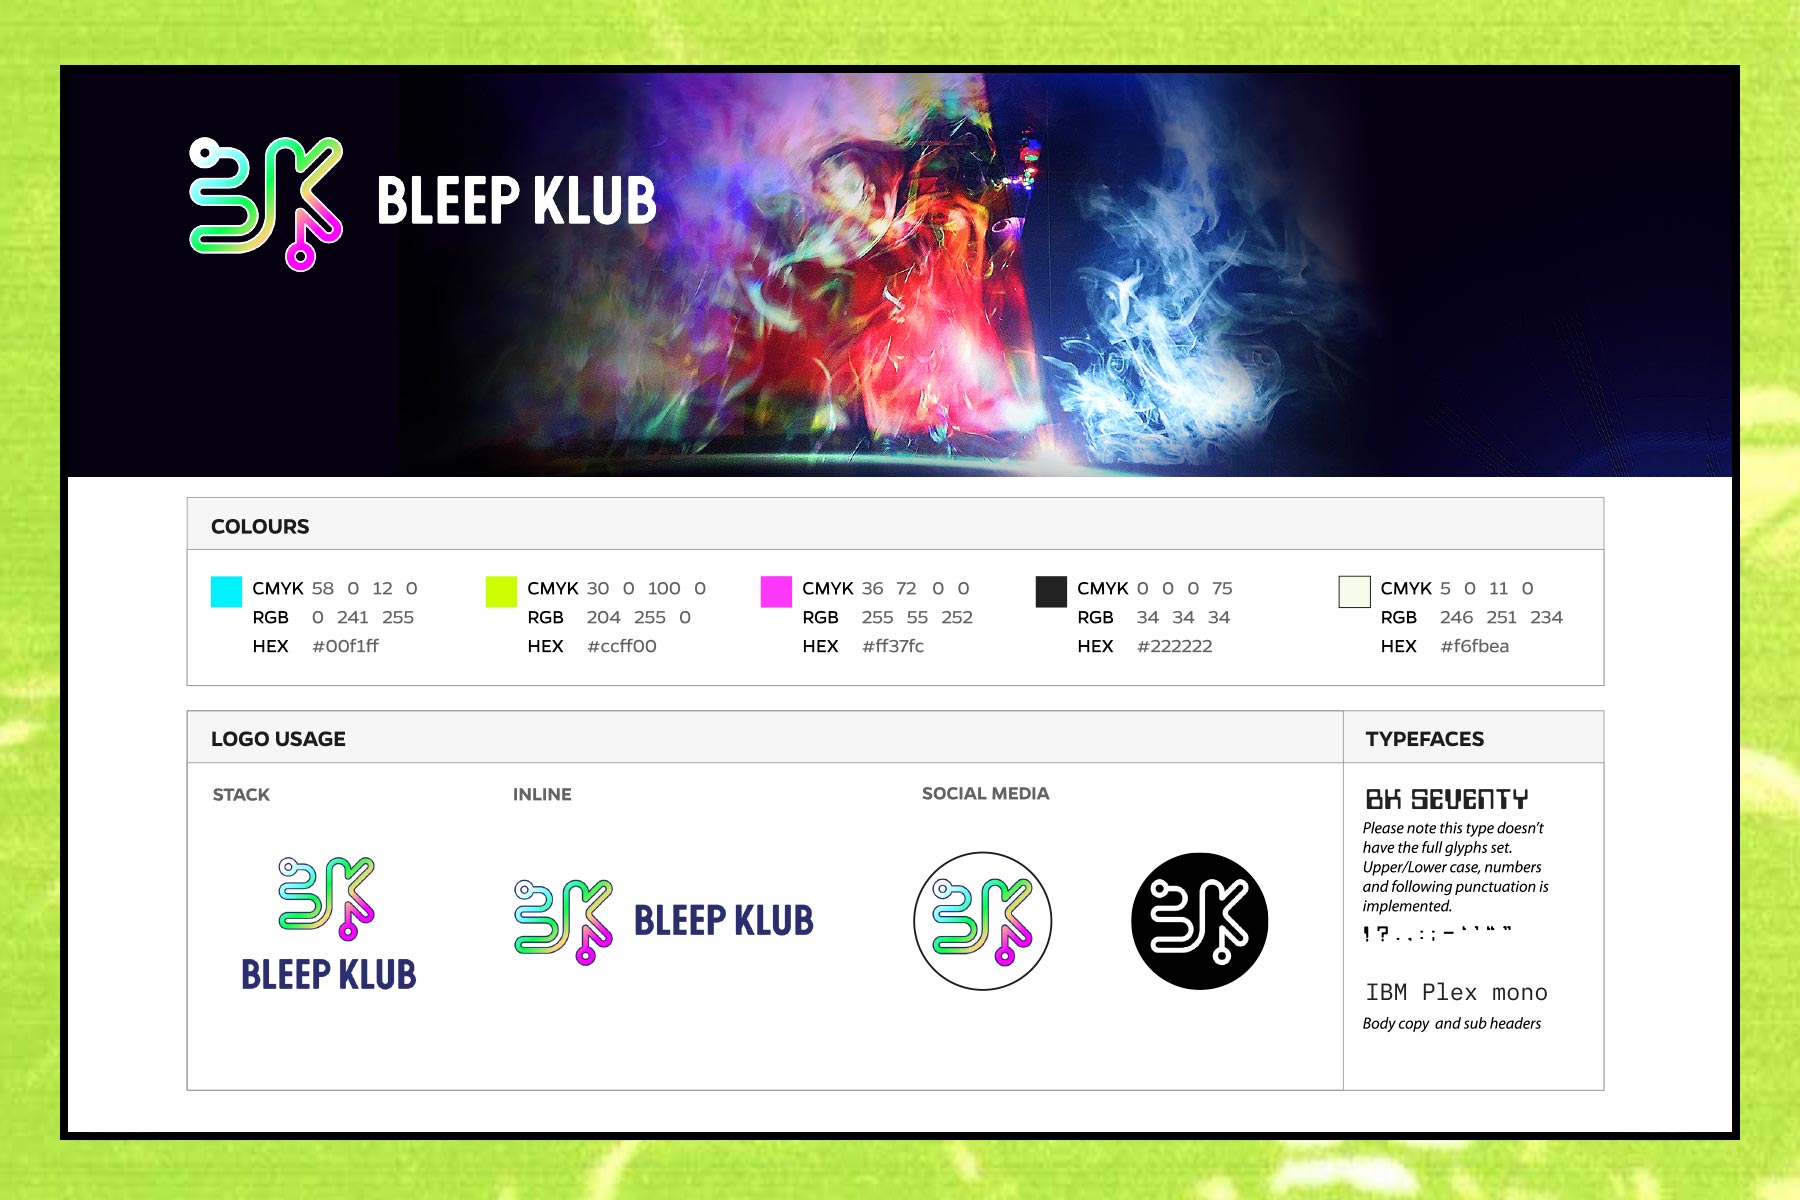 didier.co.uk - Web design, Graphic design and artwork for the music industry - Case study: Bleep Klub Branding guideline document